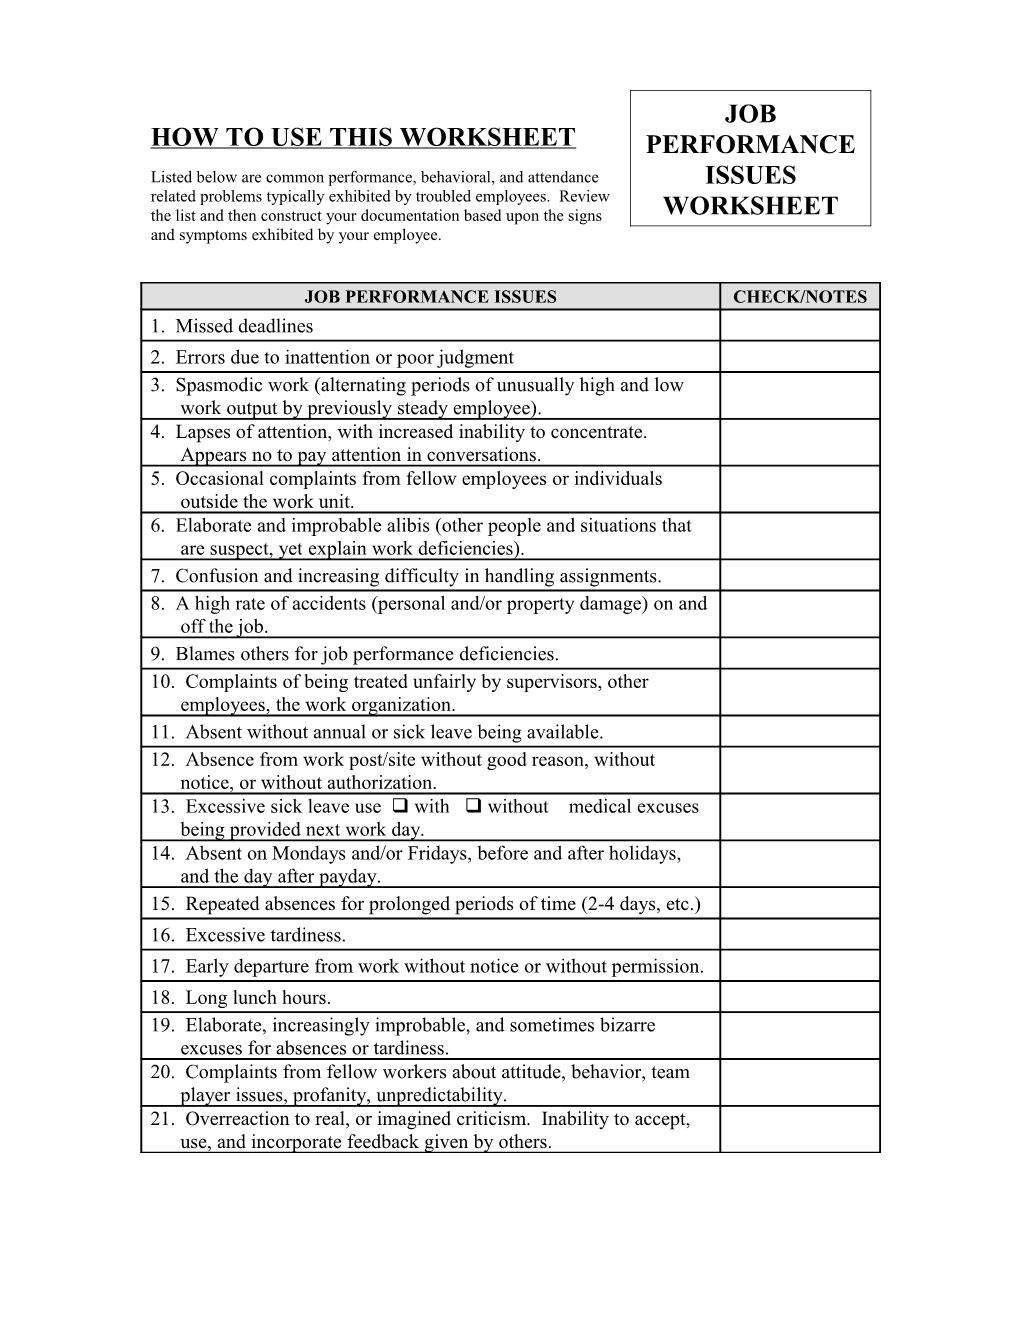 How to Use This Worksheet